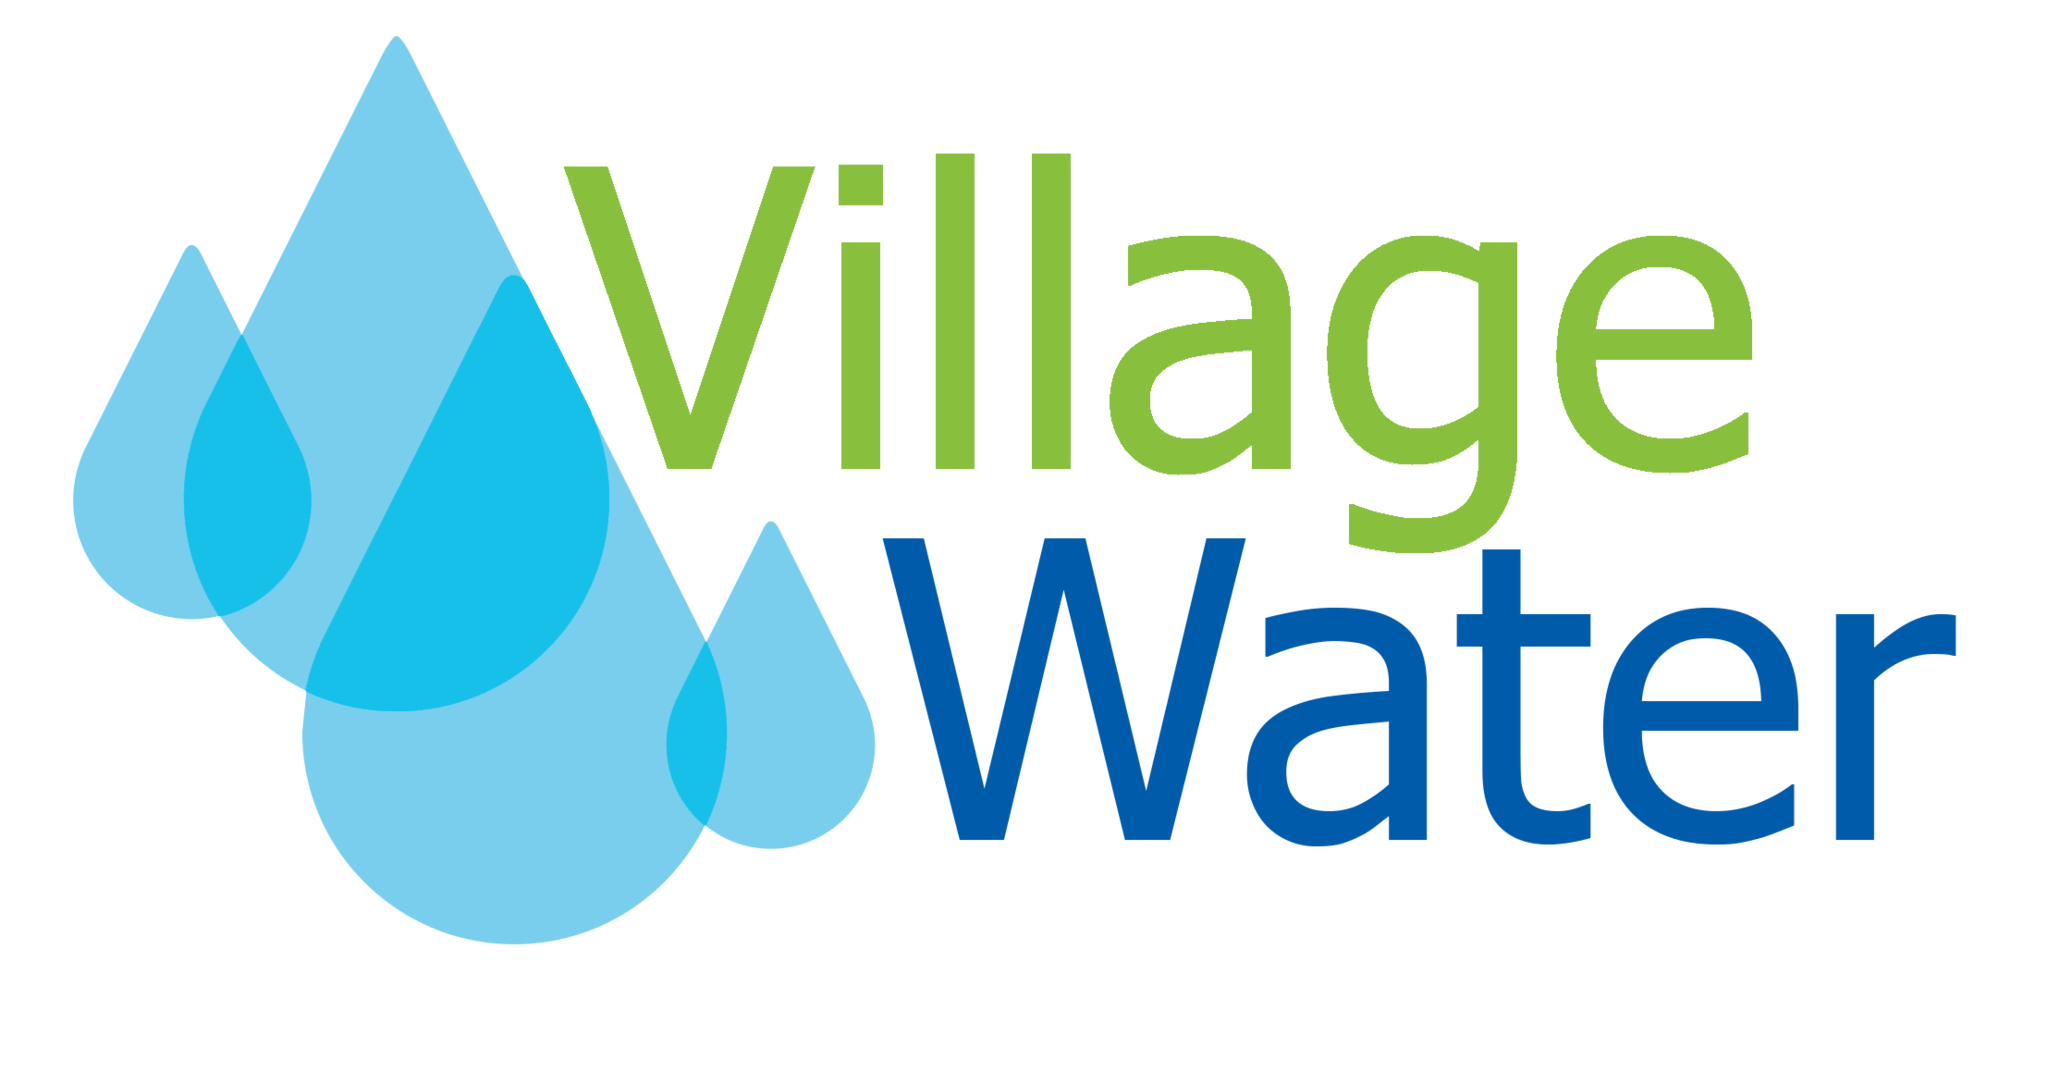 Village Water Limited Donation